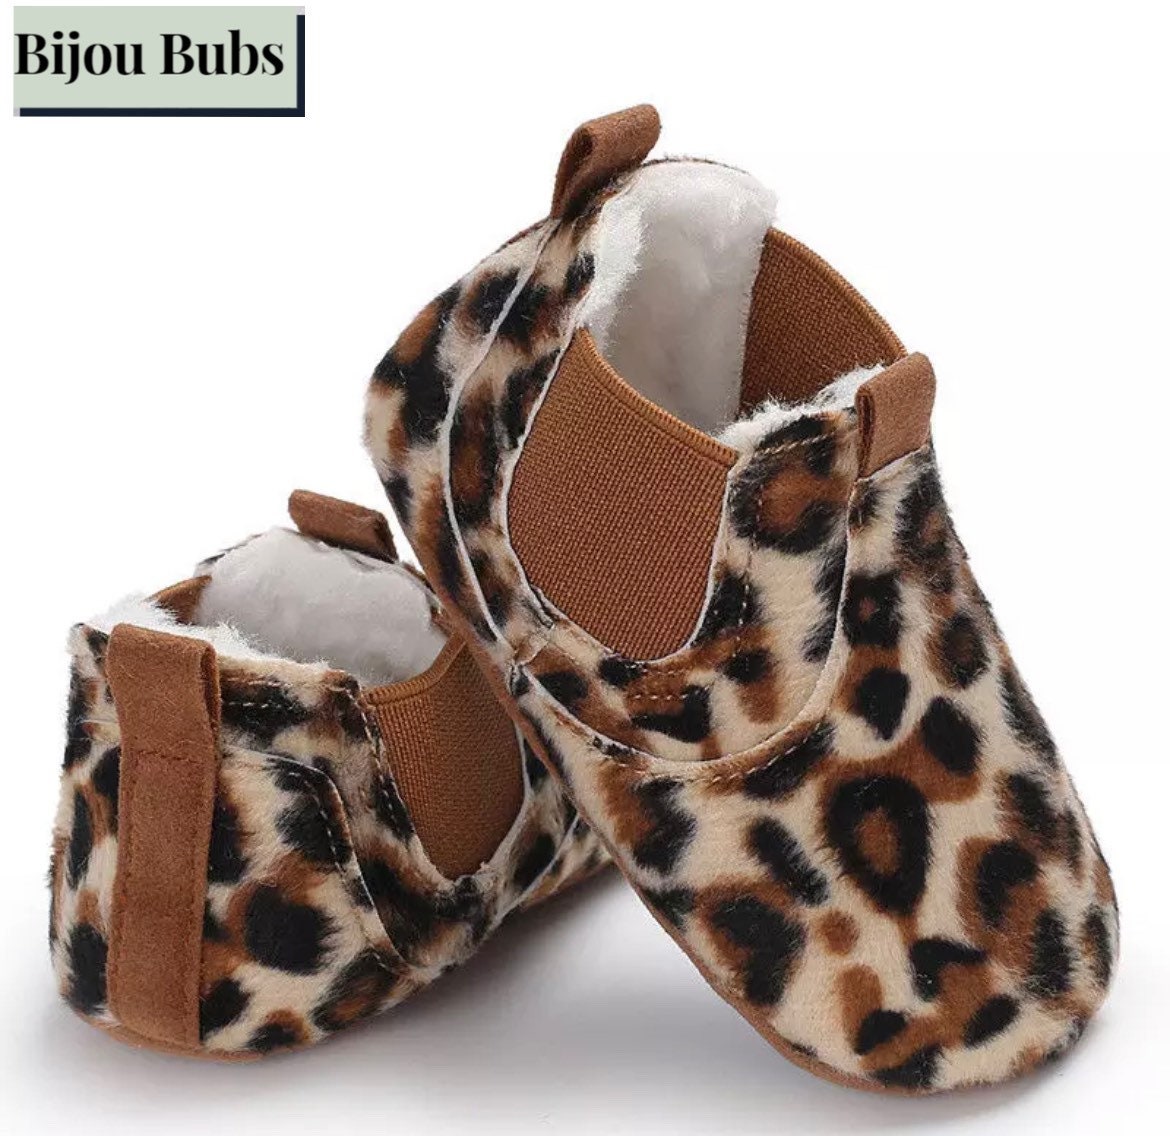 Faux Suede High Quality Baby Shoes, Breathable Upper, First Walker Bab-
 Welcome! Thanks for looking in our shop and viewing these beautiful handcrafted baby shoes.Our high quality first walker shoes are durable, breathable &amp; super -Bijou Bubs